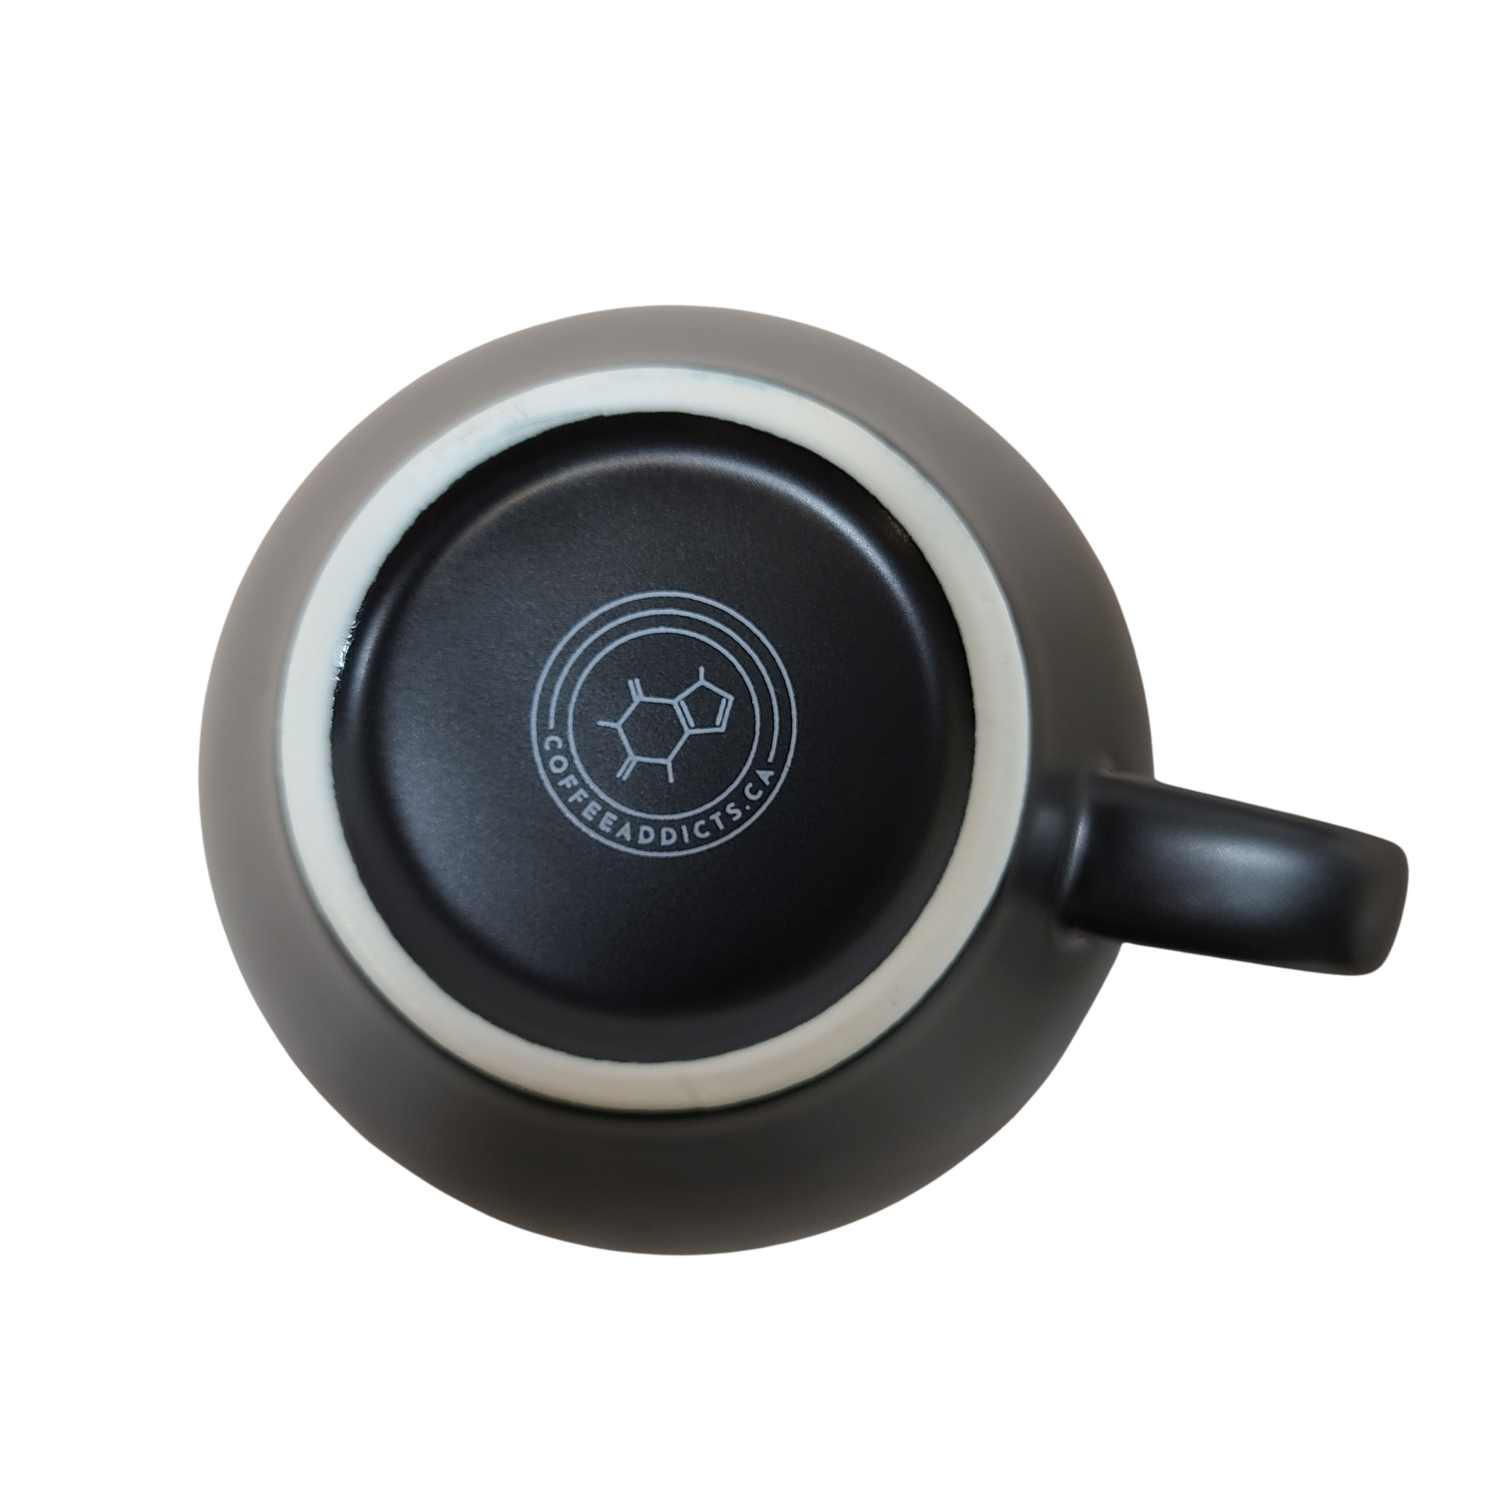 Coffee Addicts commercial ceramic cup in matte black latte cappuccino cup 8oz 250ml underside